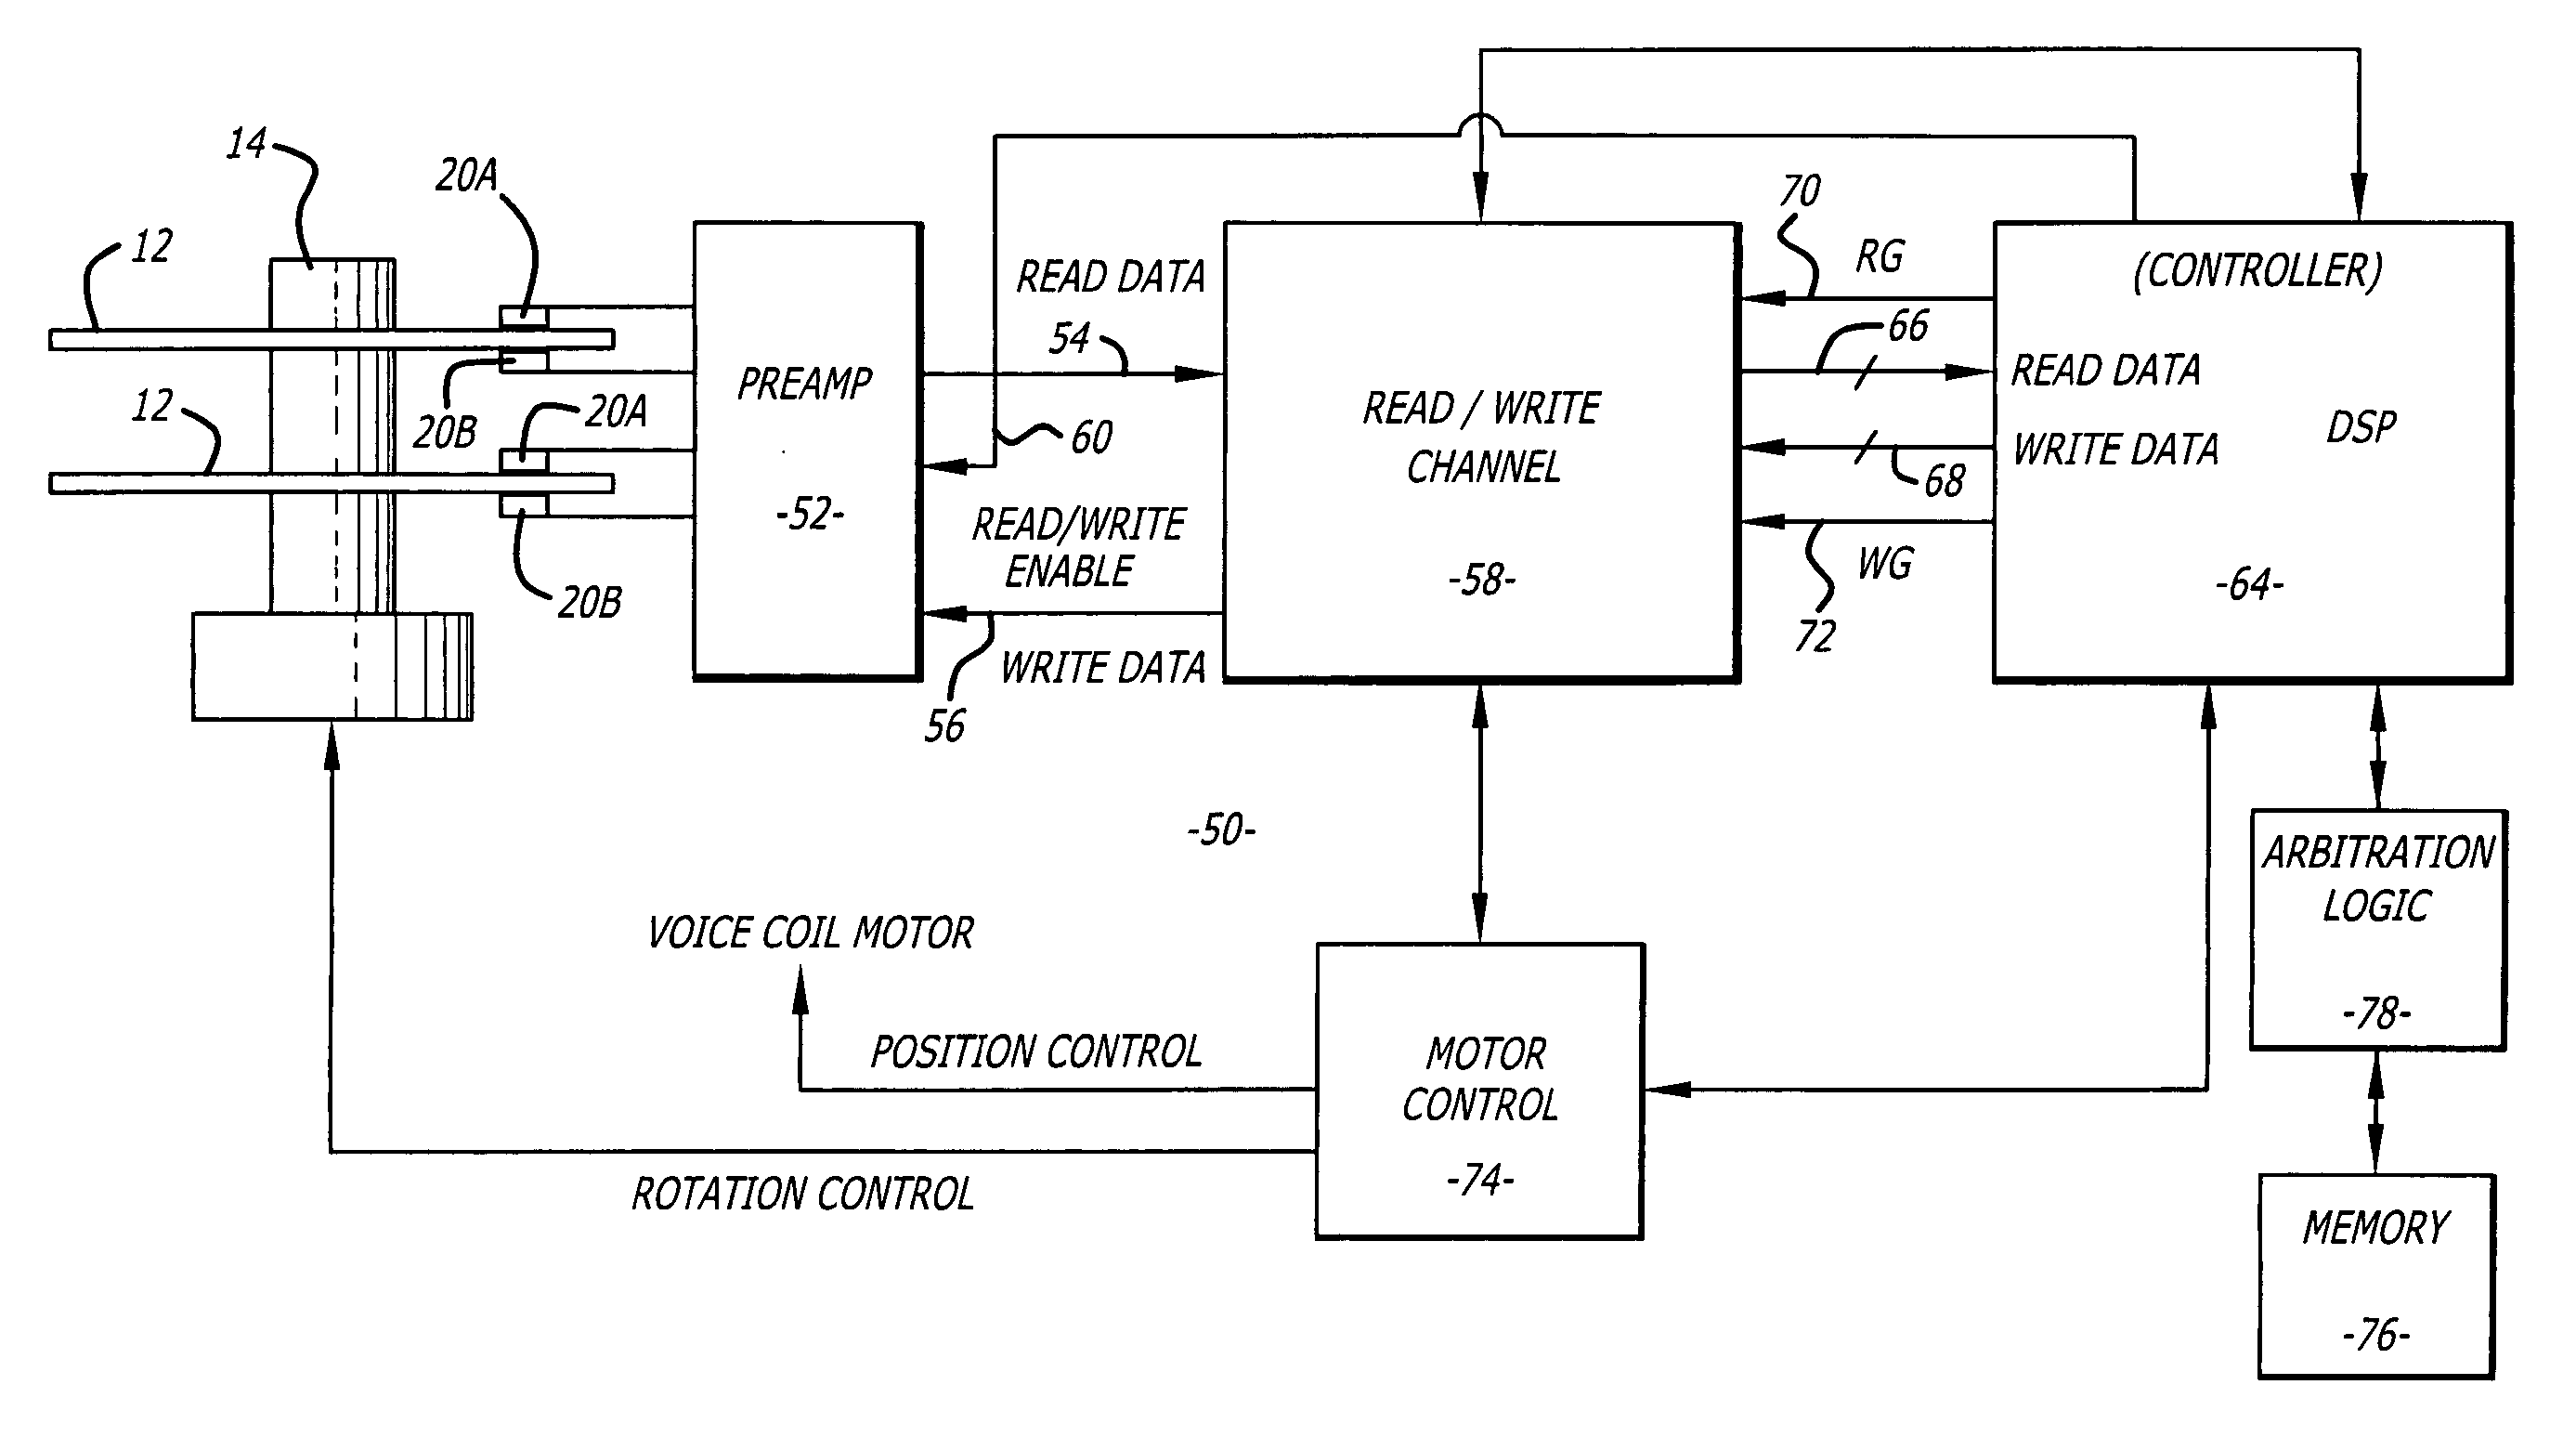 Method to control spiral start point during ammonite servo track writer process using reference servo track band